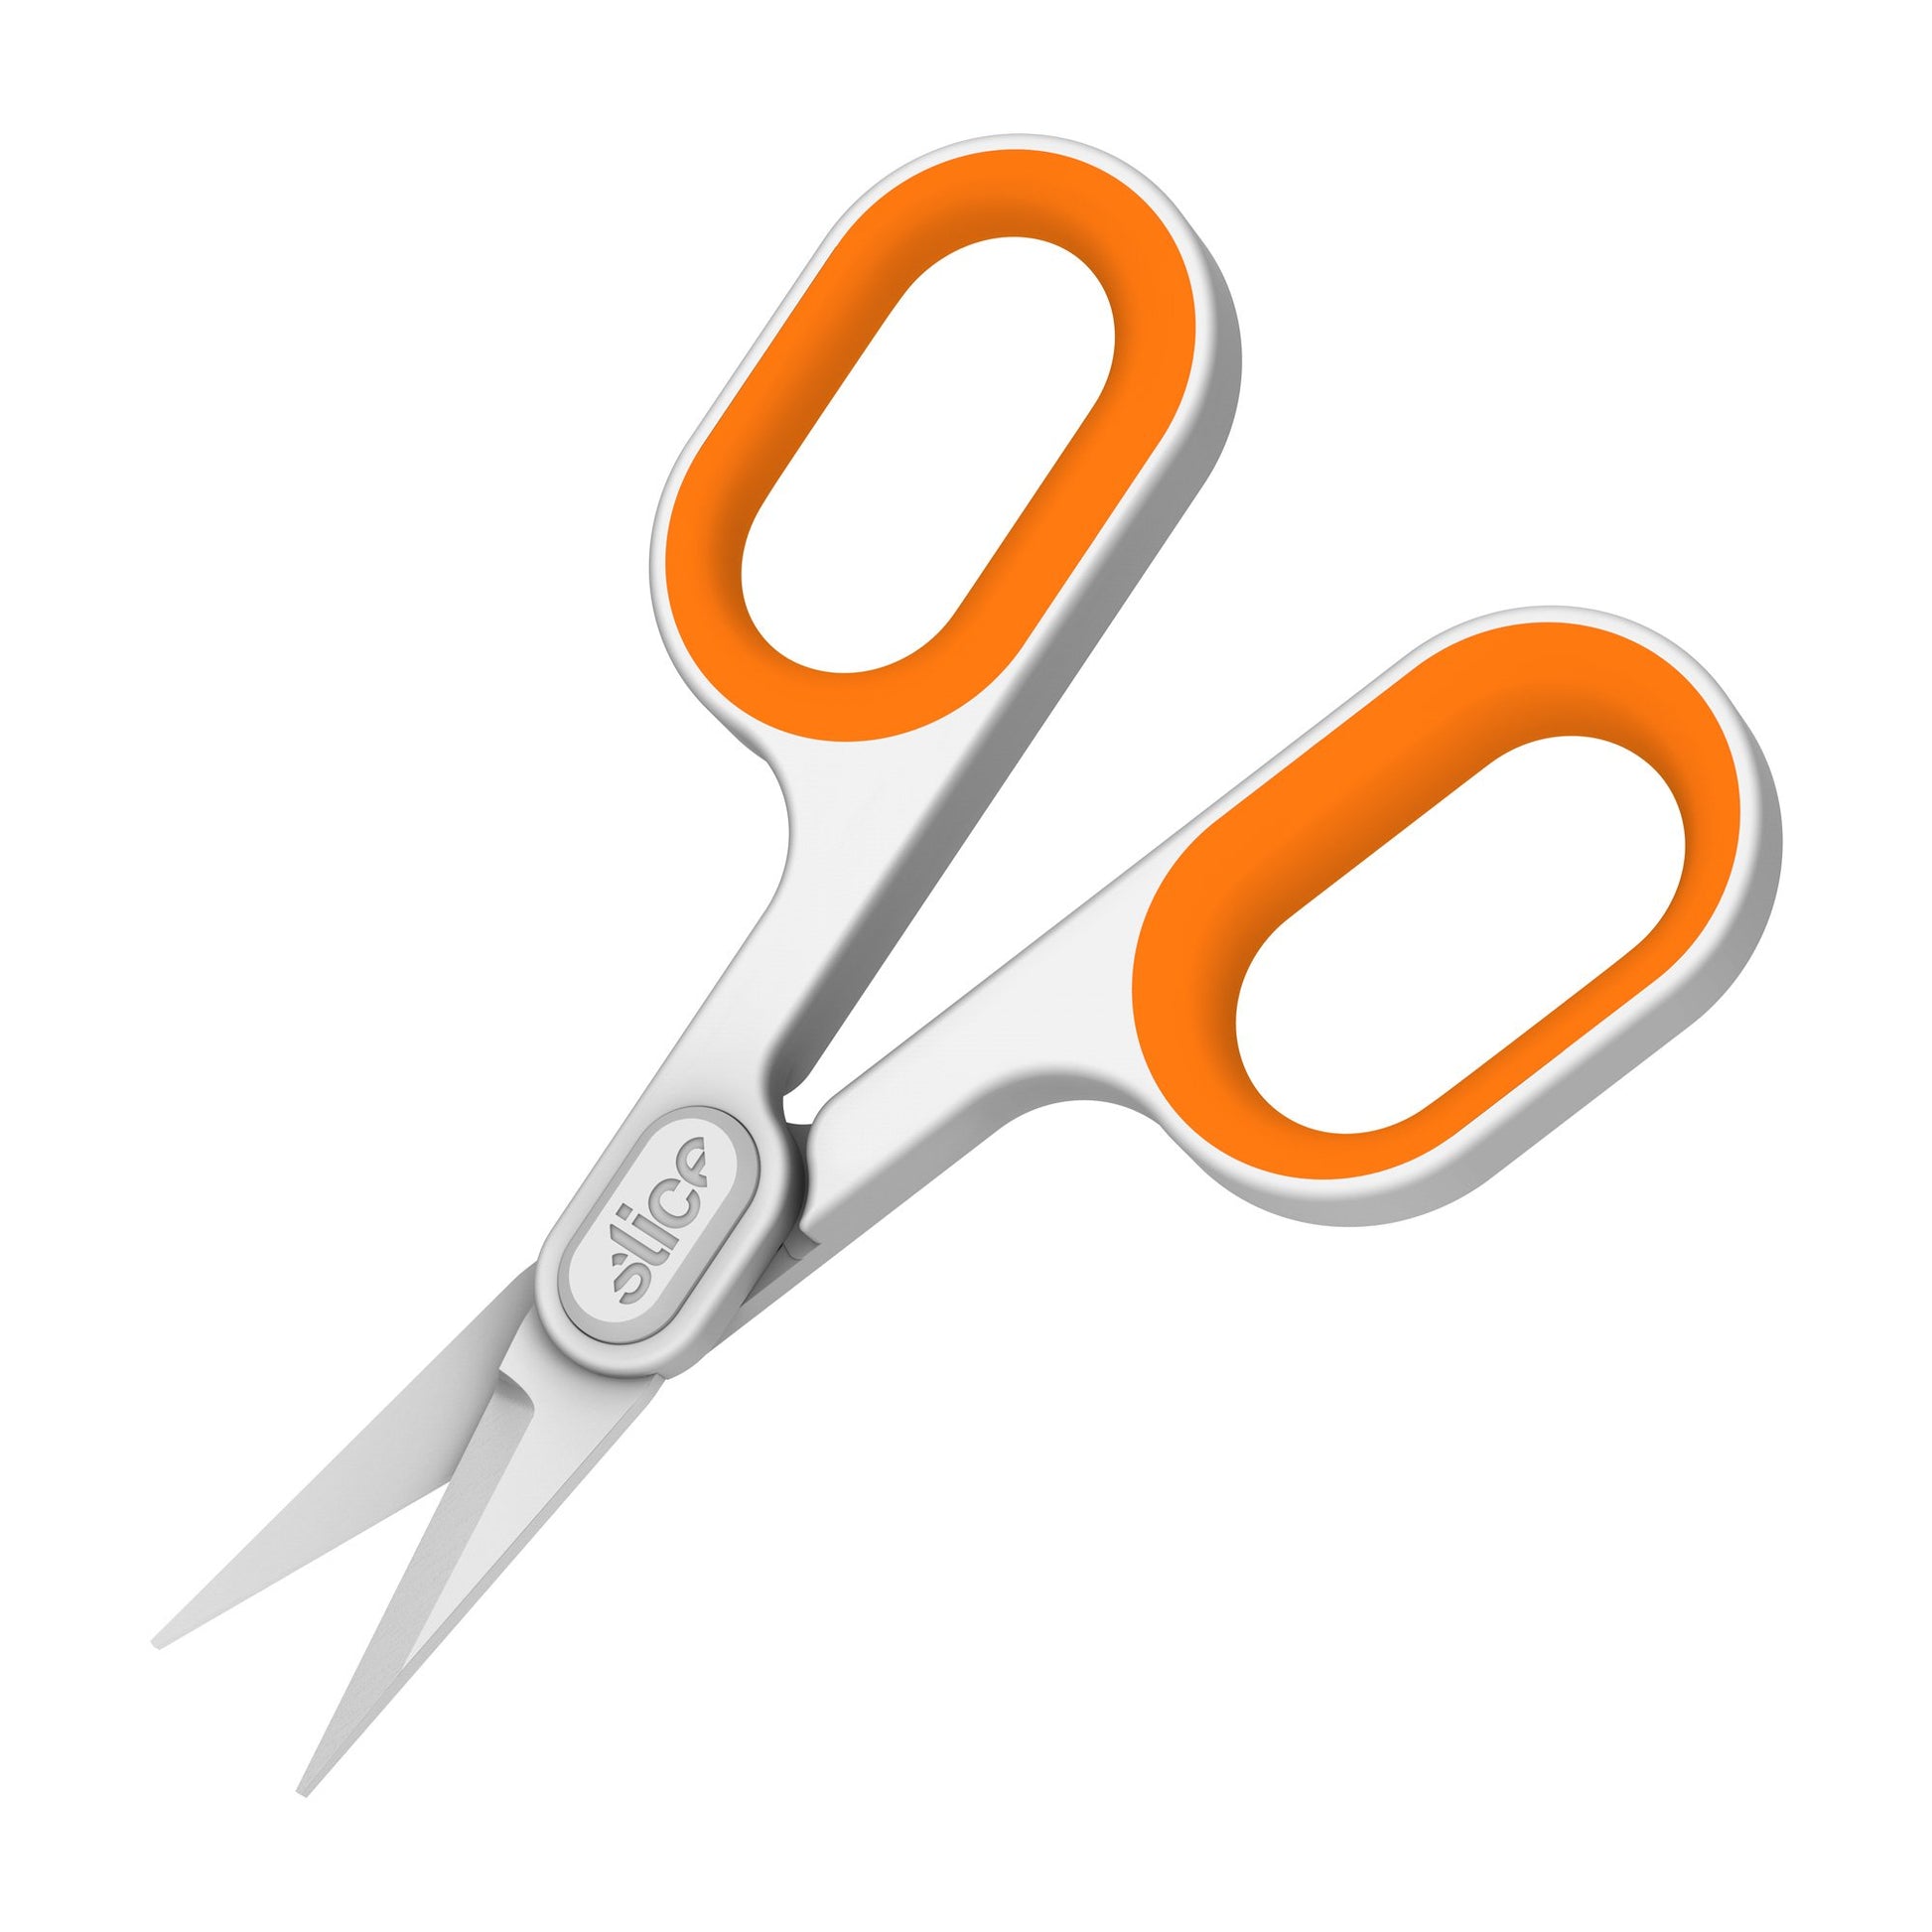 The Slice® 10546 Small Pointed Scissors